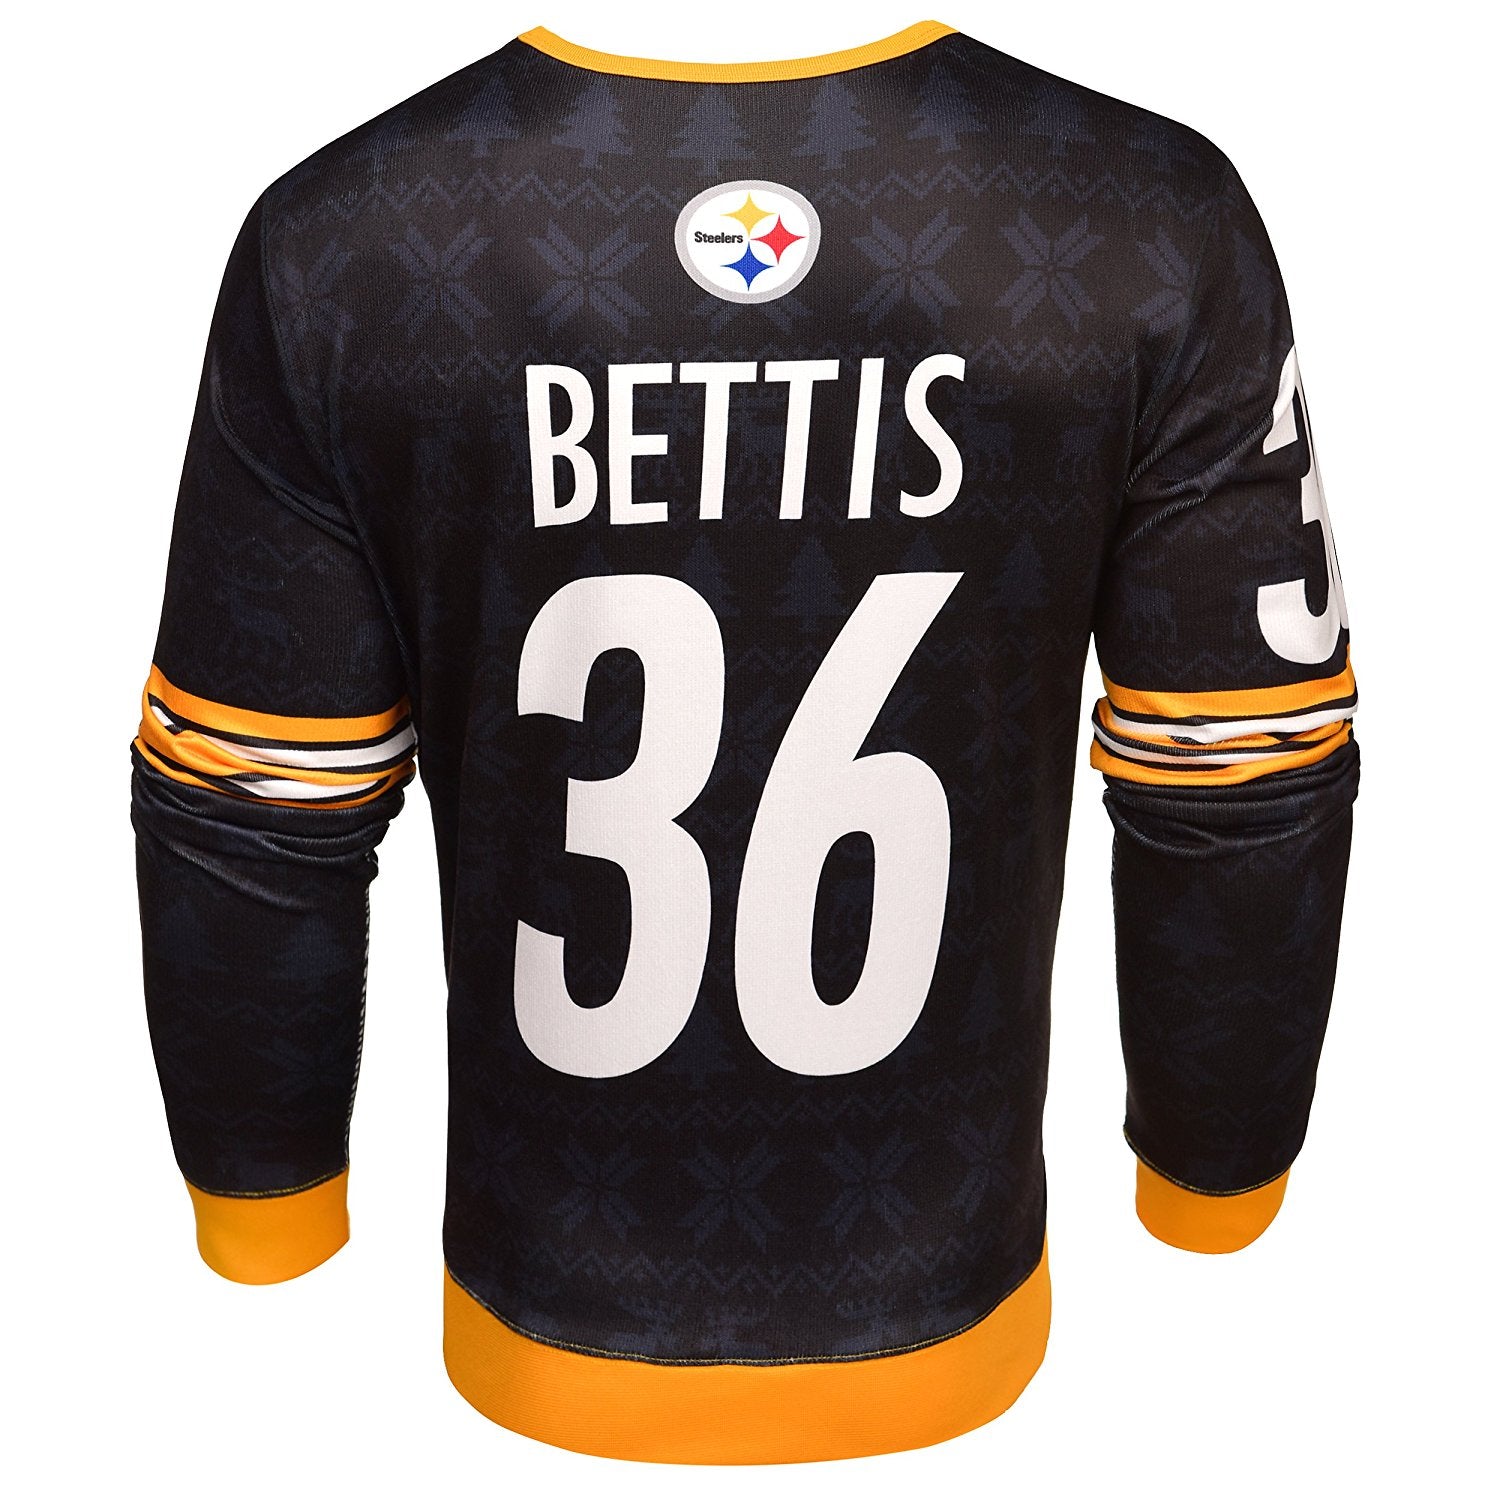 Pittsburgh Steelers #36 Jerome Bettis Signed Pittsburgh Steelers Jersey